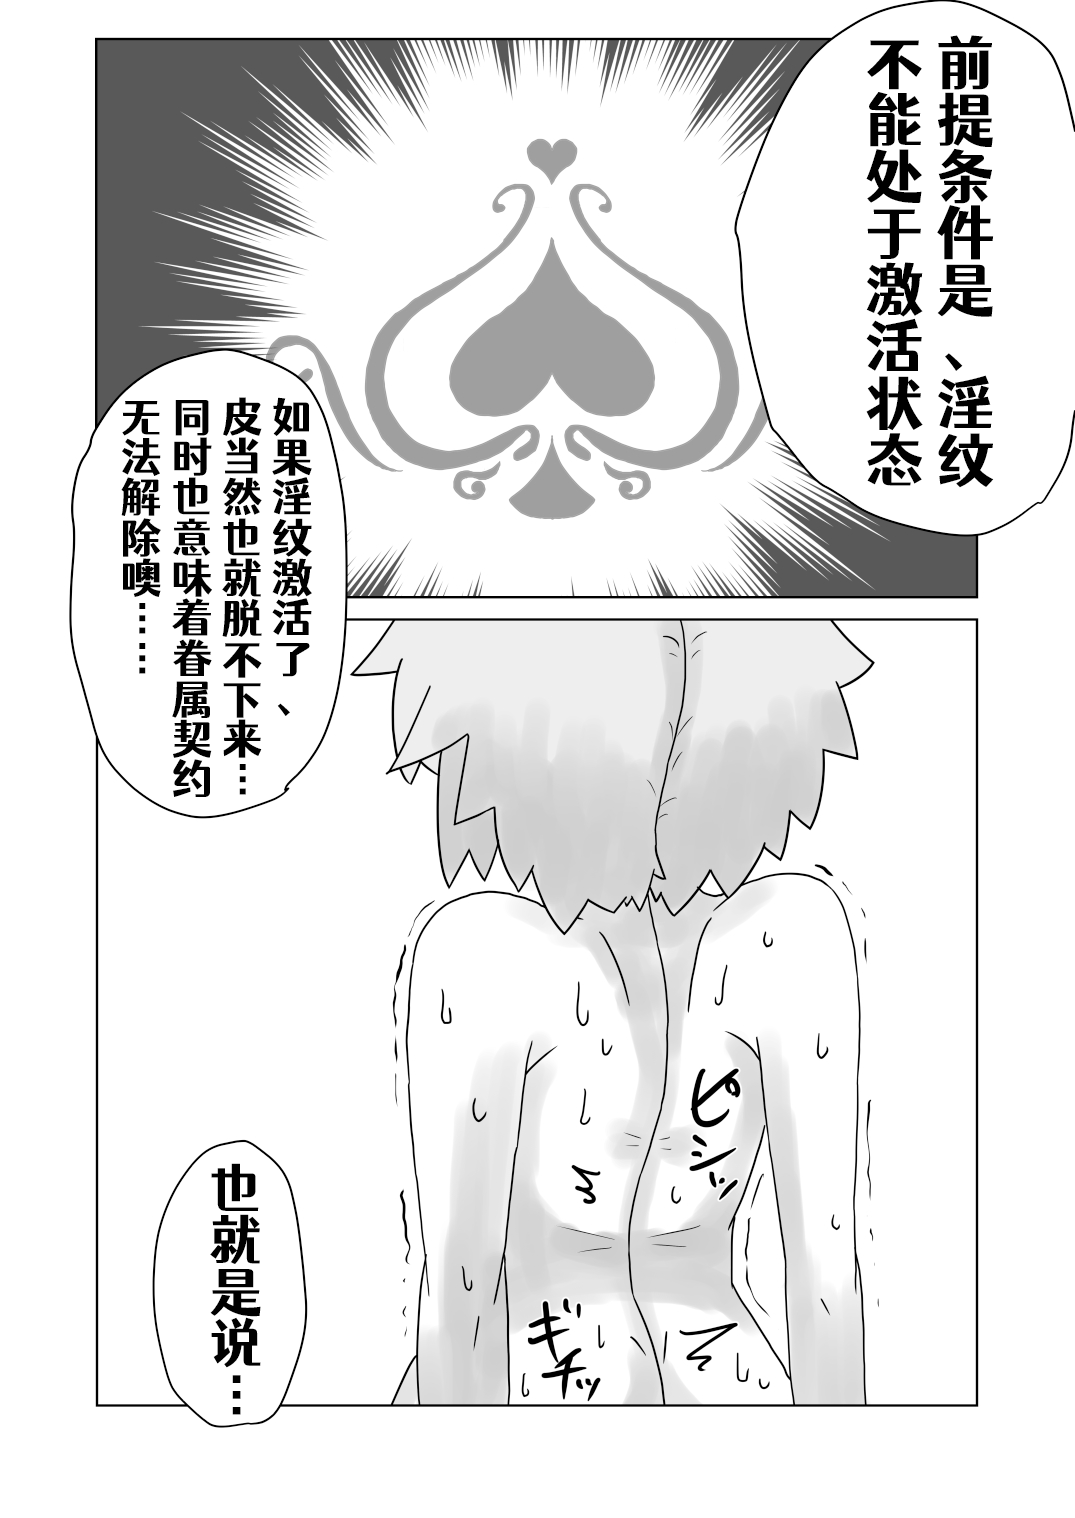 Sealing Lewd Tattoo ~Enveloped by the Succubus' Skin~ [灯台下暮らし (灯台守)] 封淫紋 ～サキュバスの皮に包まれて～